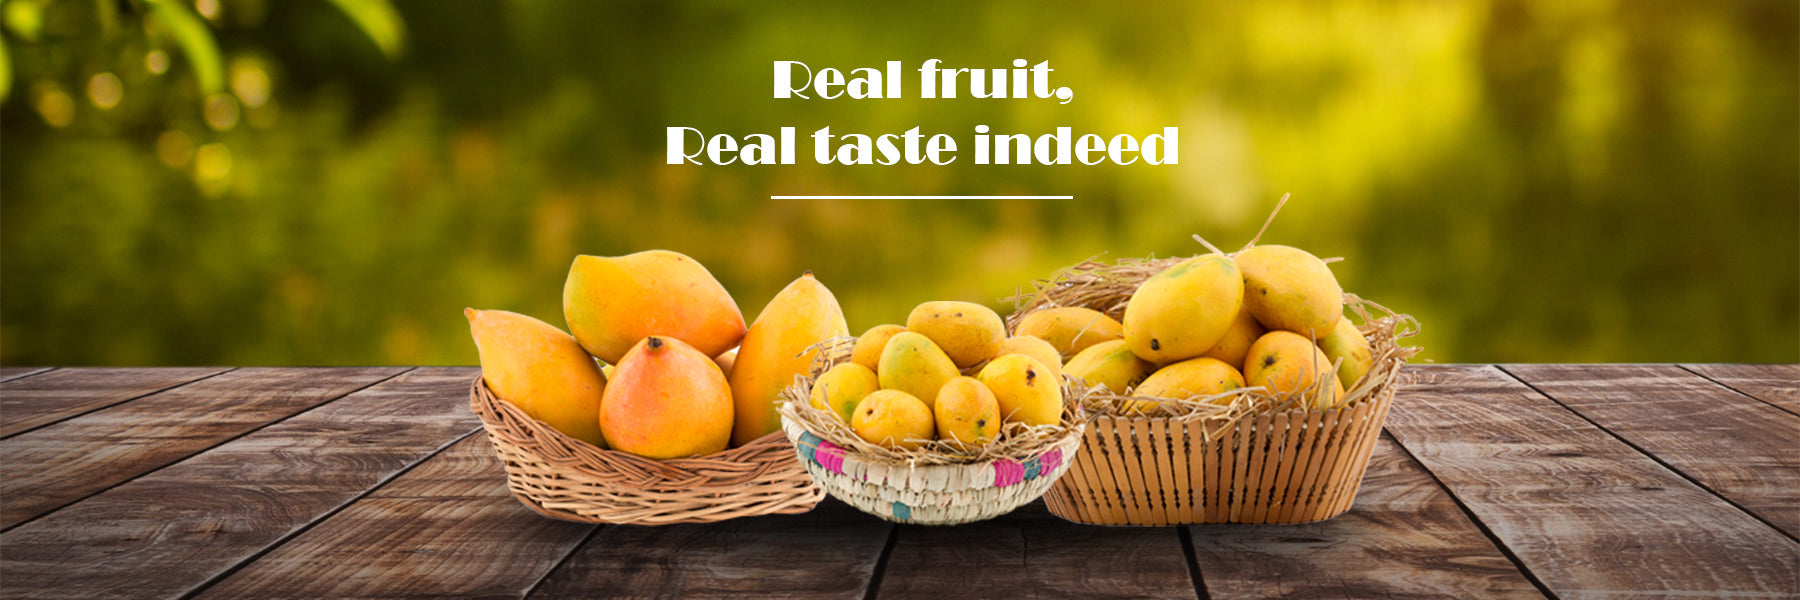 Real Fruit, Real taste indeed FromIndia.com